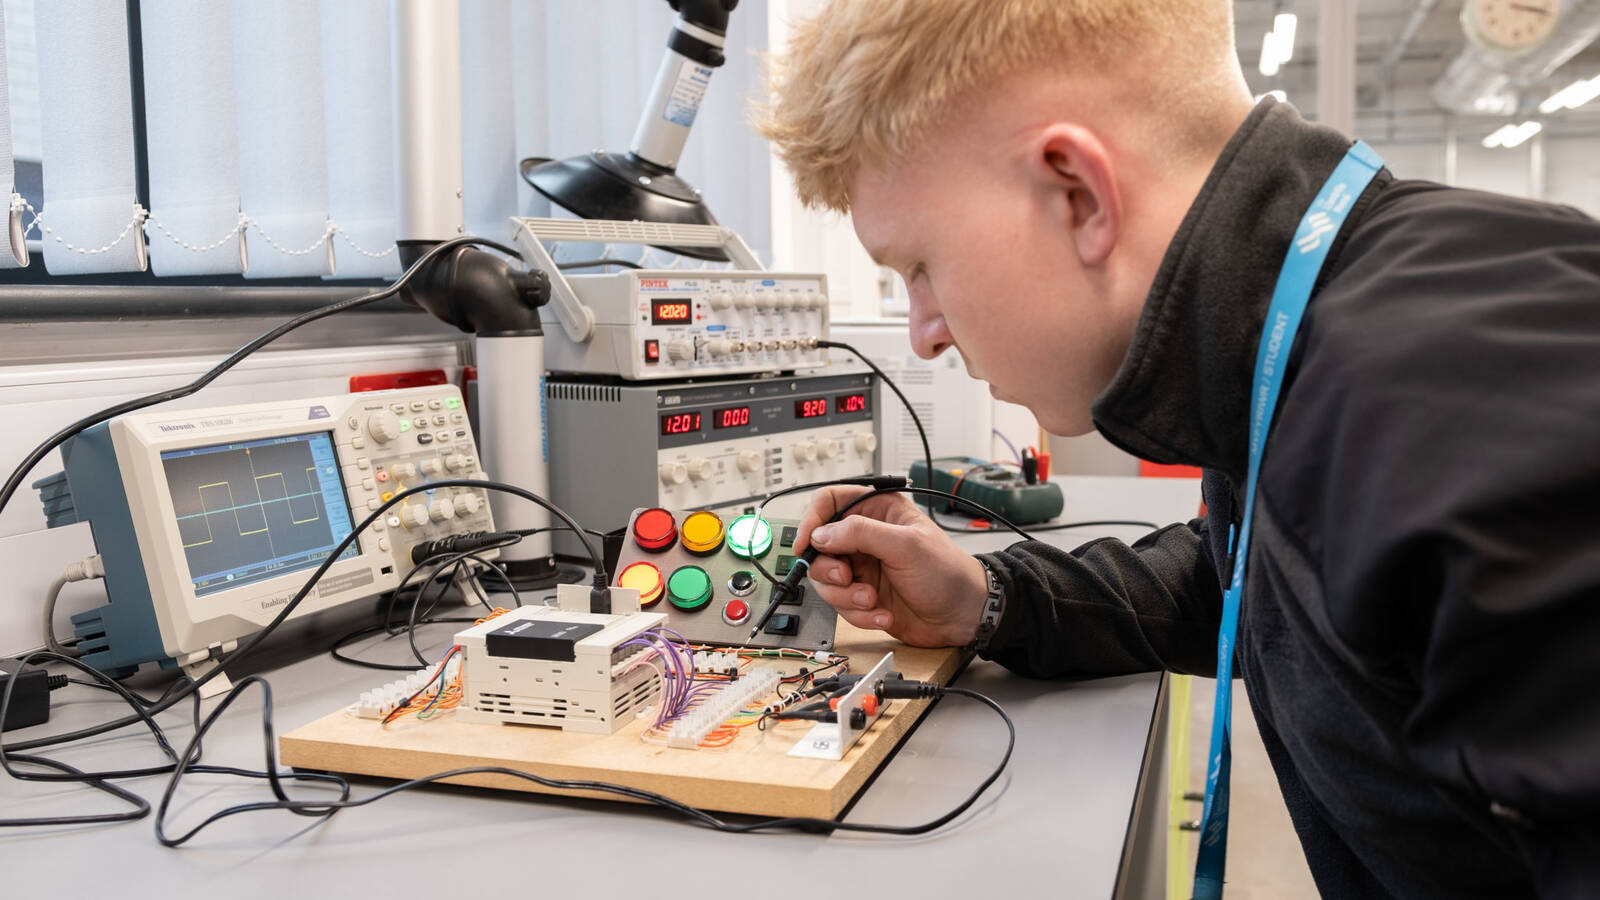 Apprenticeship learner soldering a circuit board in the lab